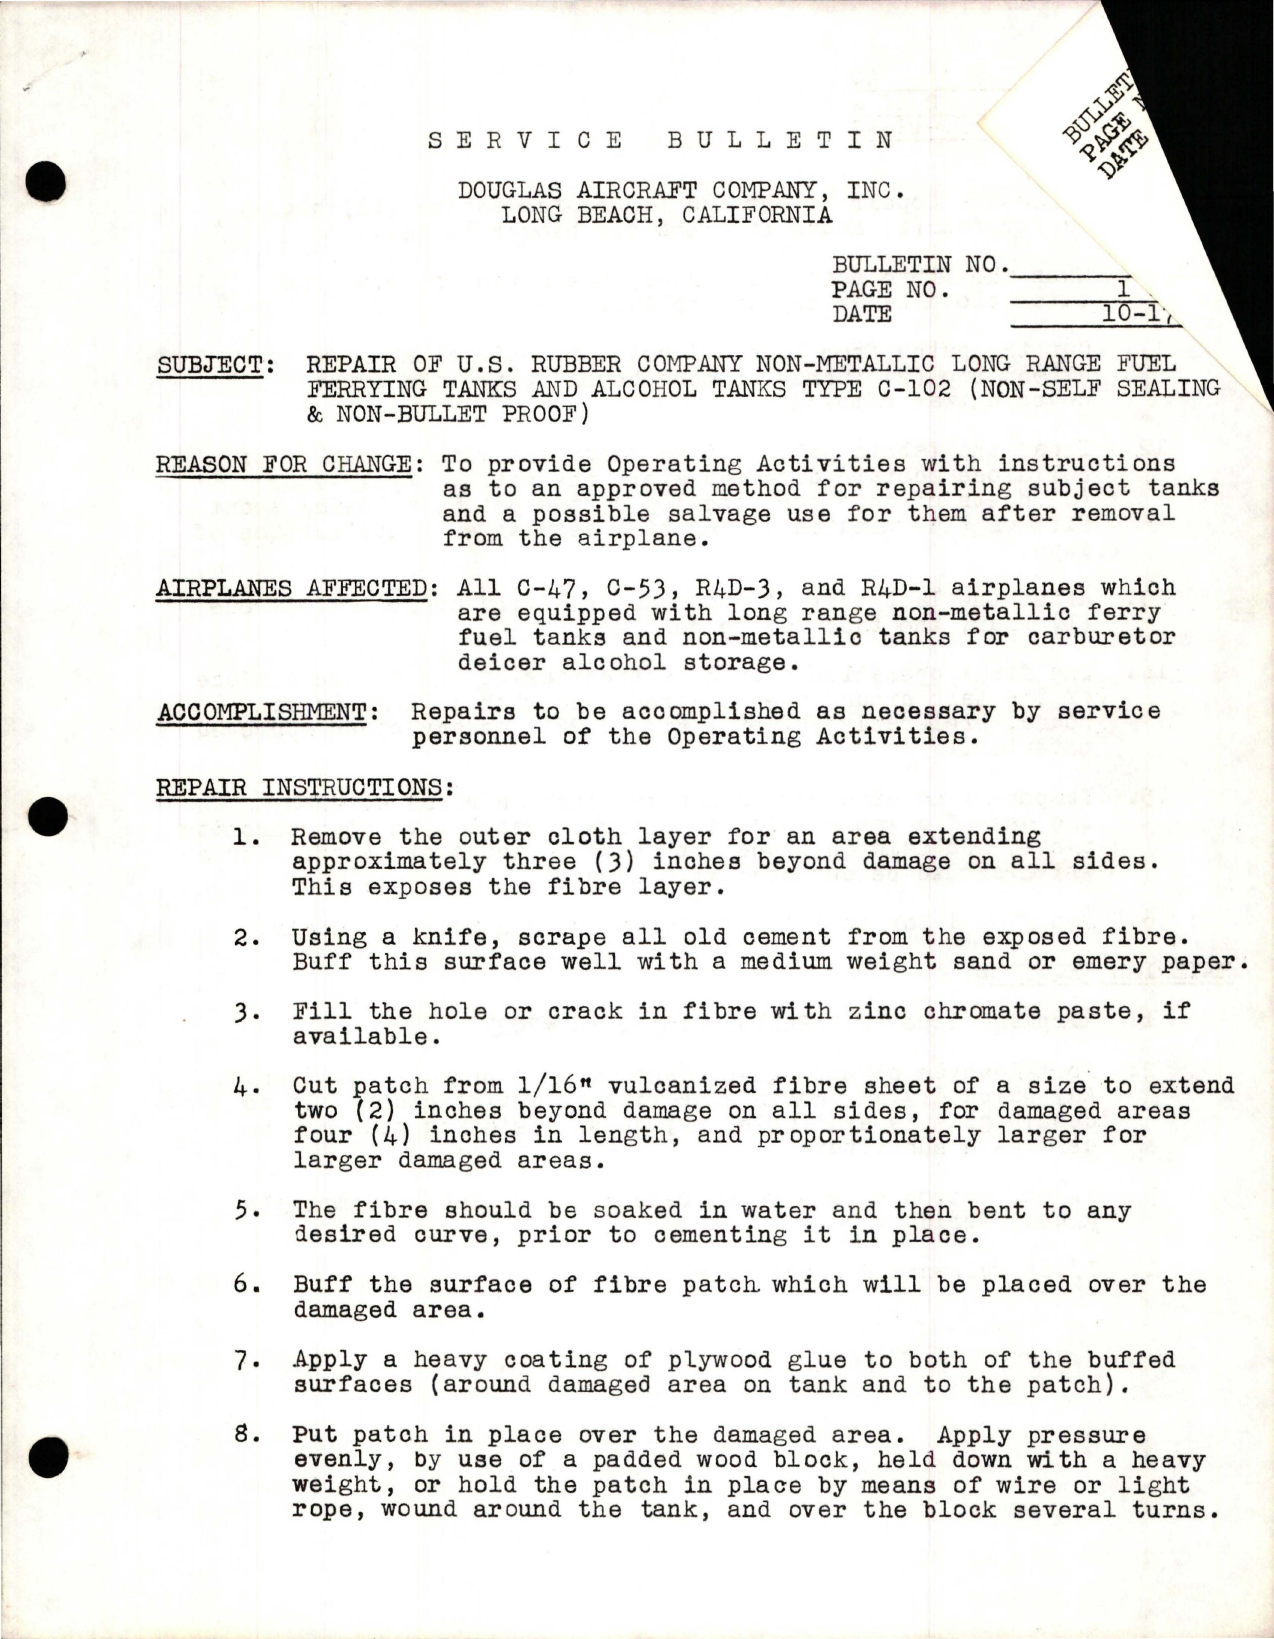 Sample page 1 from AirCorps Library document: Repair of US Rubber Co Non-Metallic Long Range Fuel Ferrying Tanks and Alcohol Tanks Type C-102 (Non-Self Sealing & Non-Bullet Proof) 